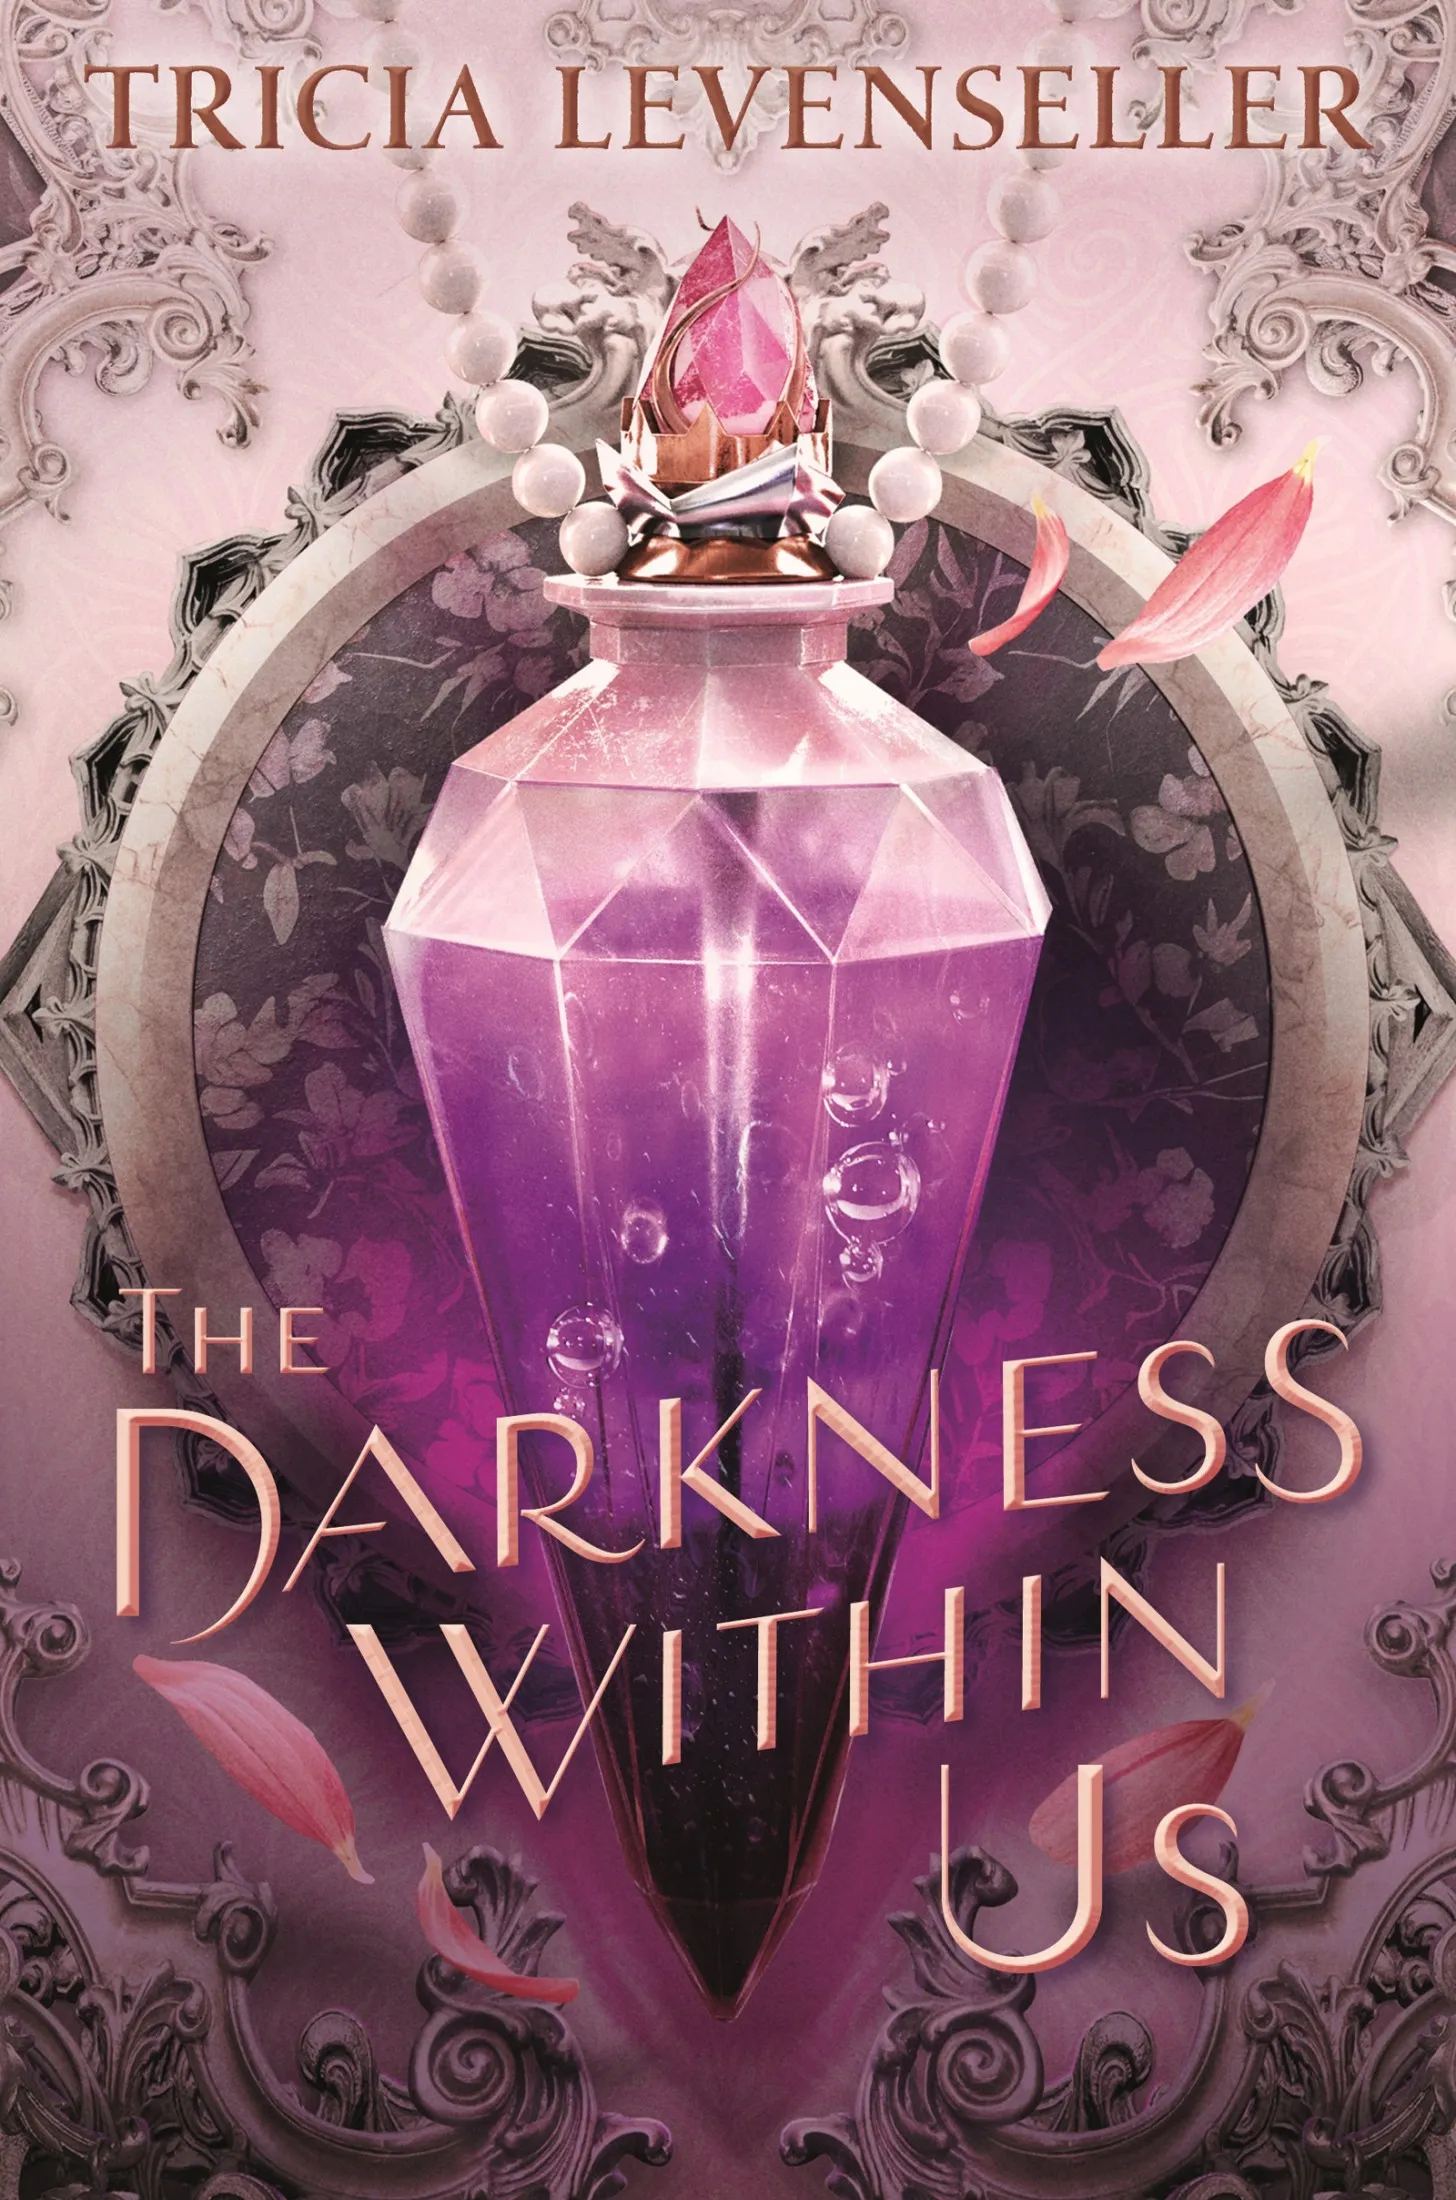 The Darkness Within Us (The Shadows Between Us #2)